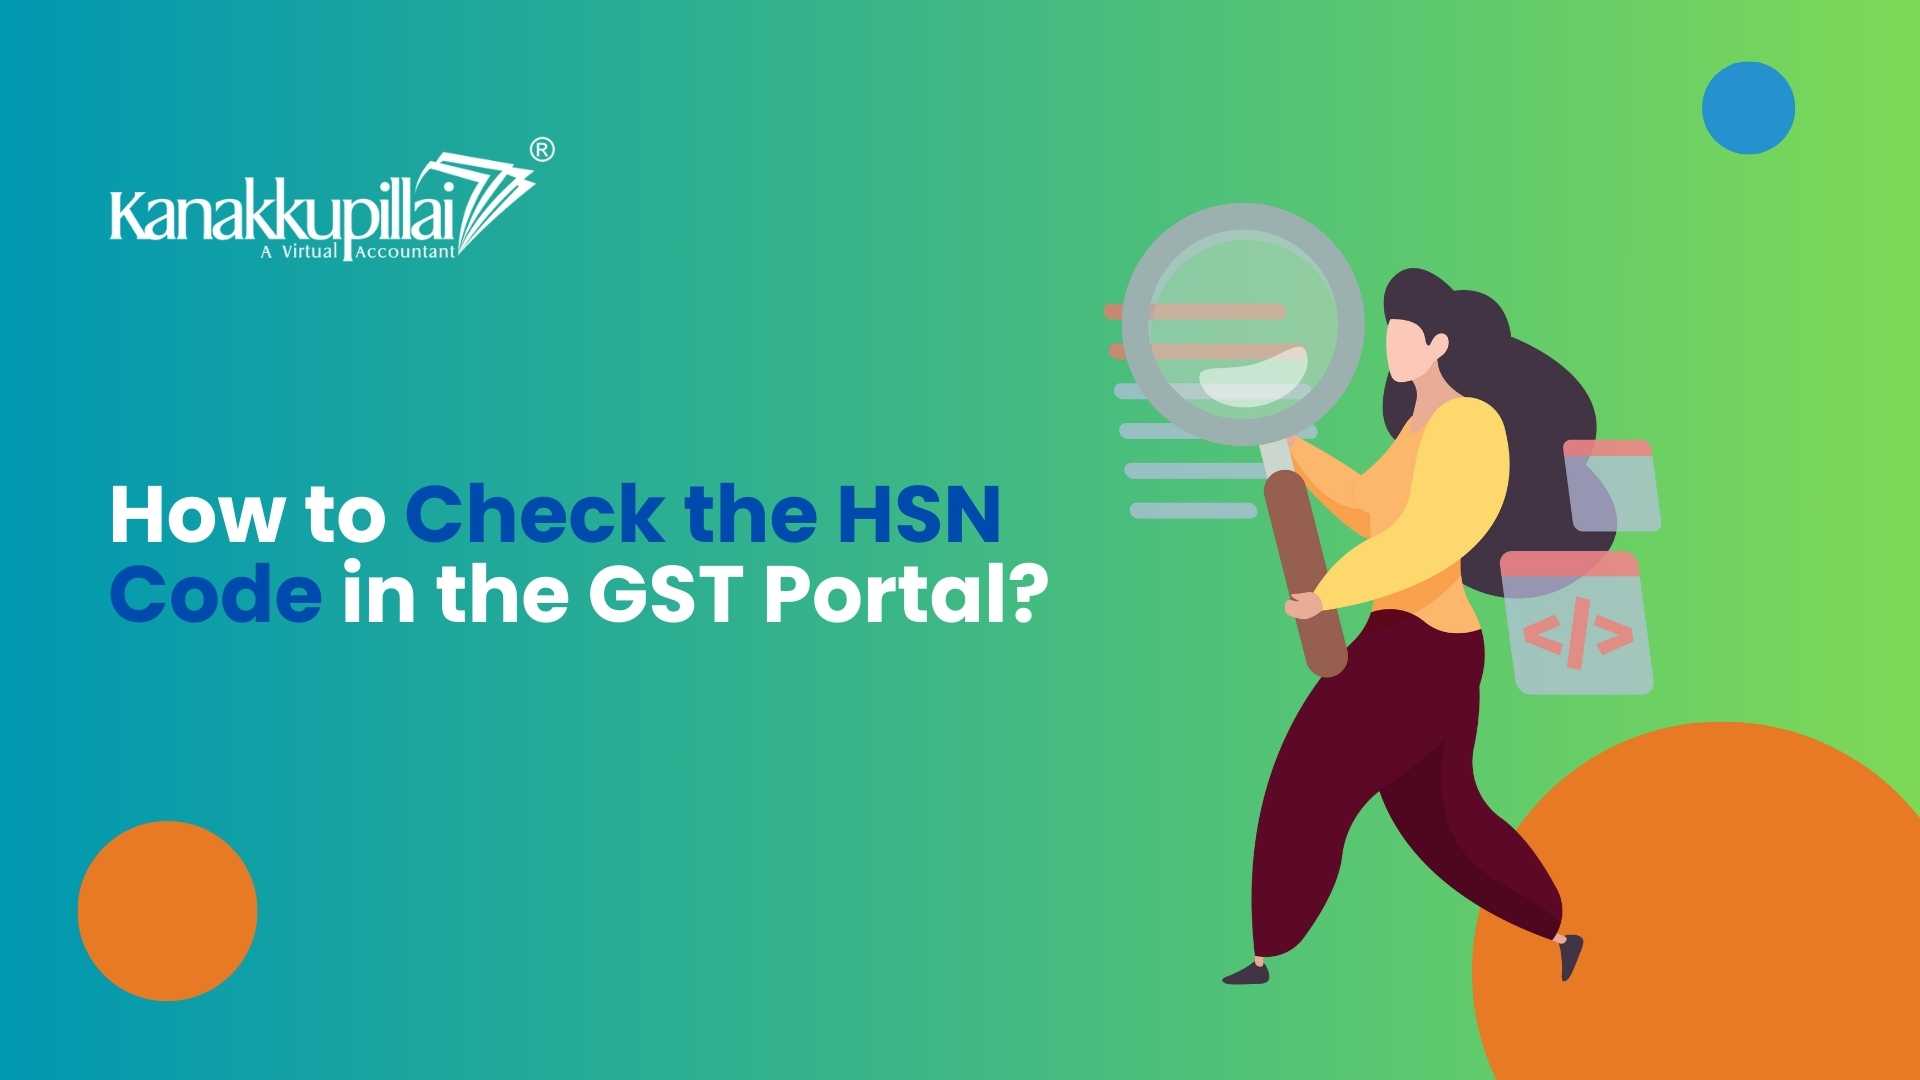 How to Check the HSN Code in GST Portal?